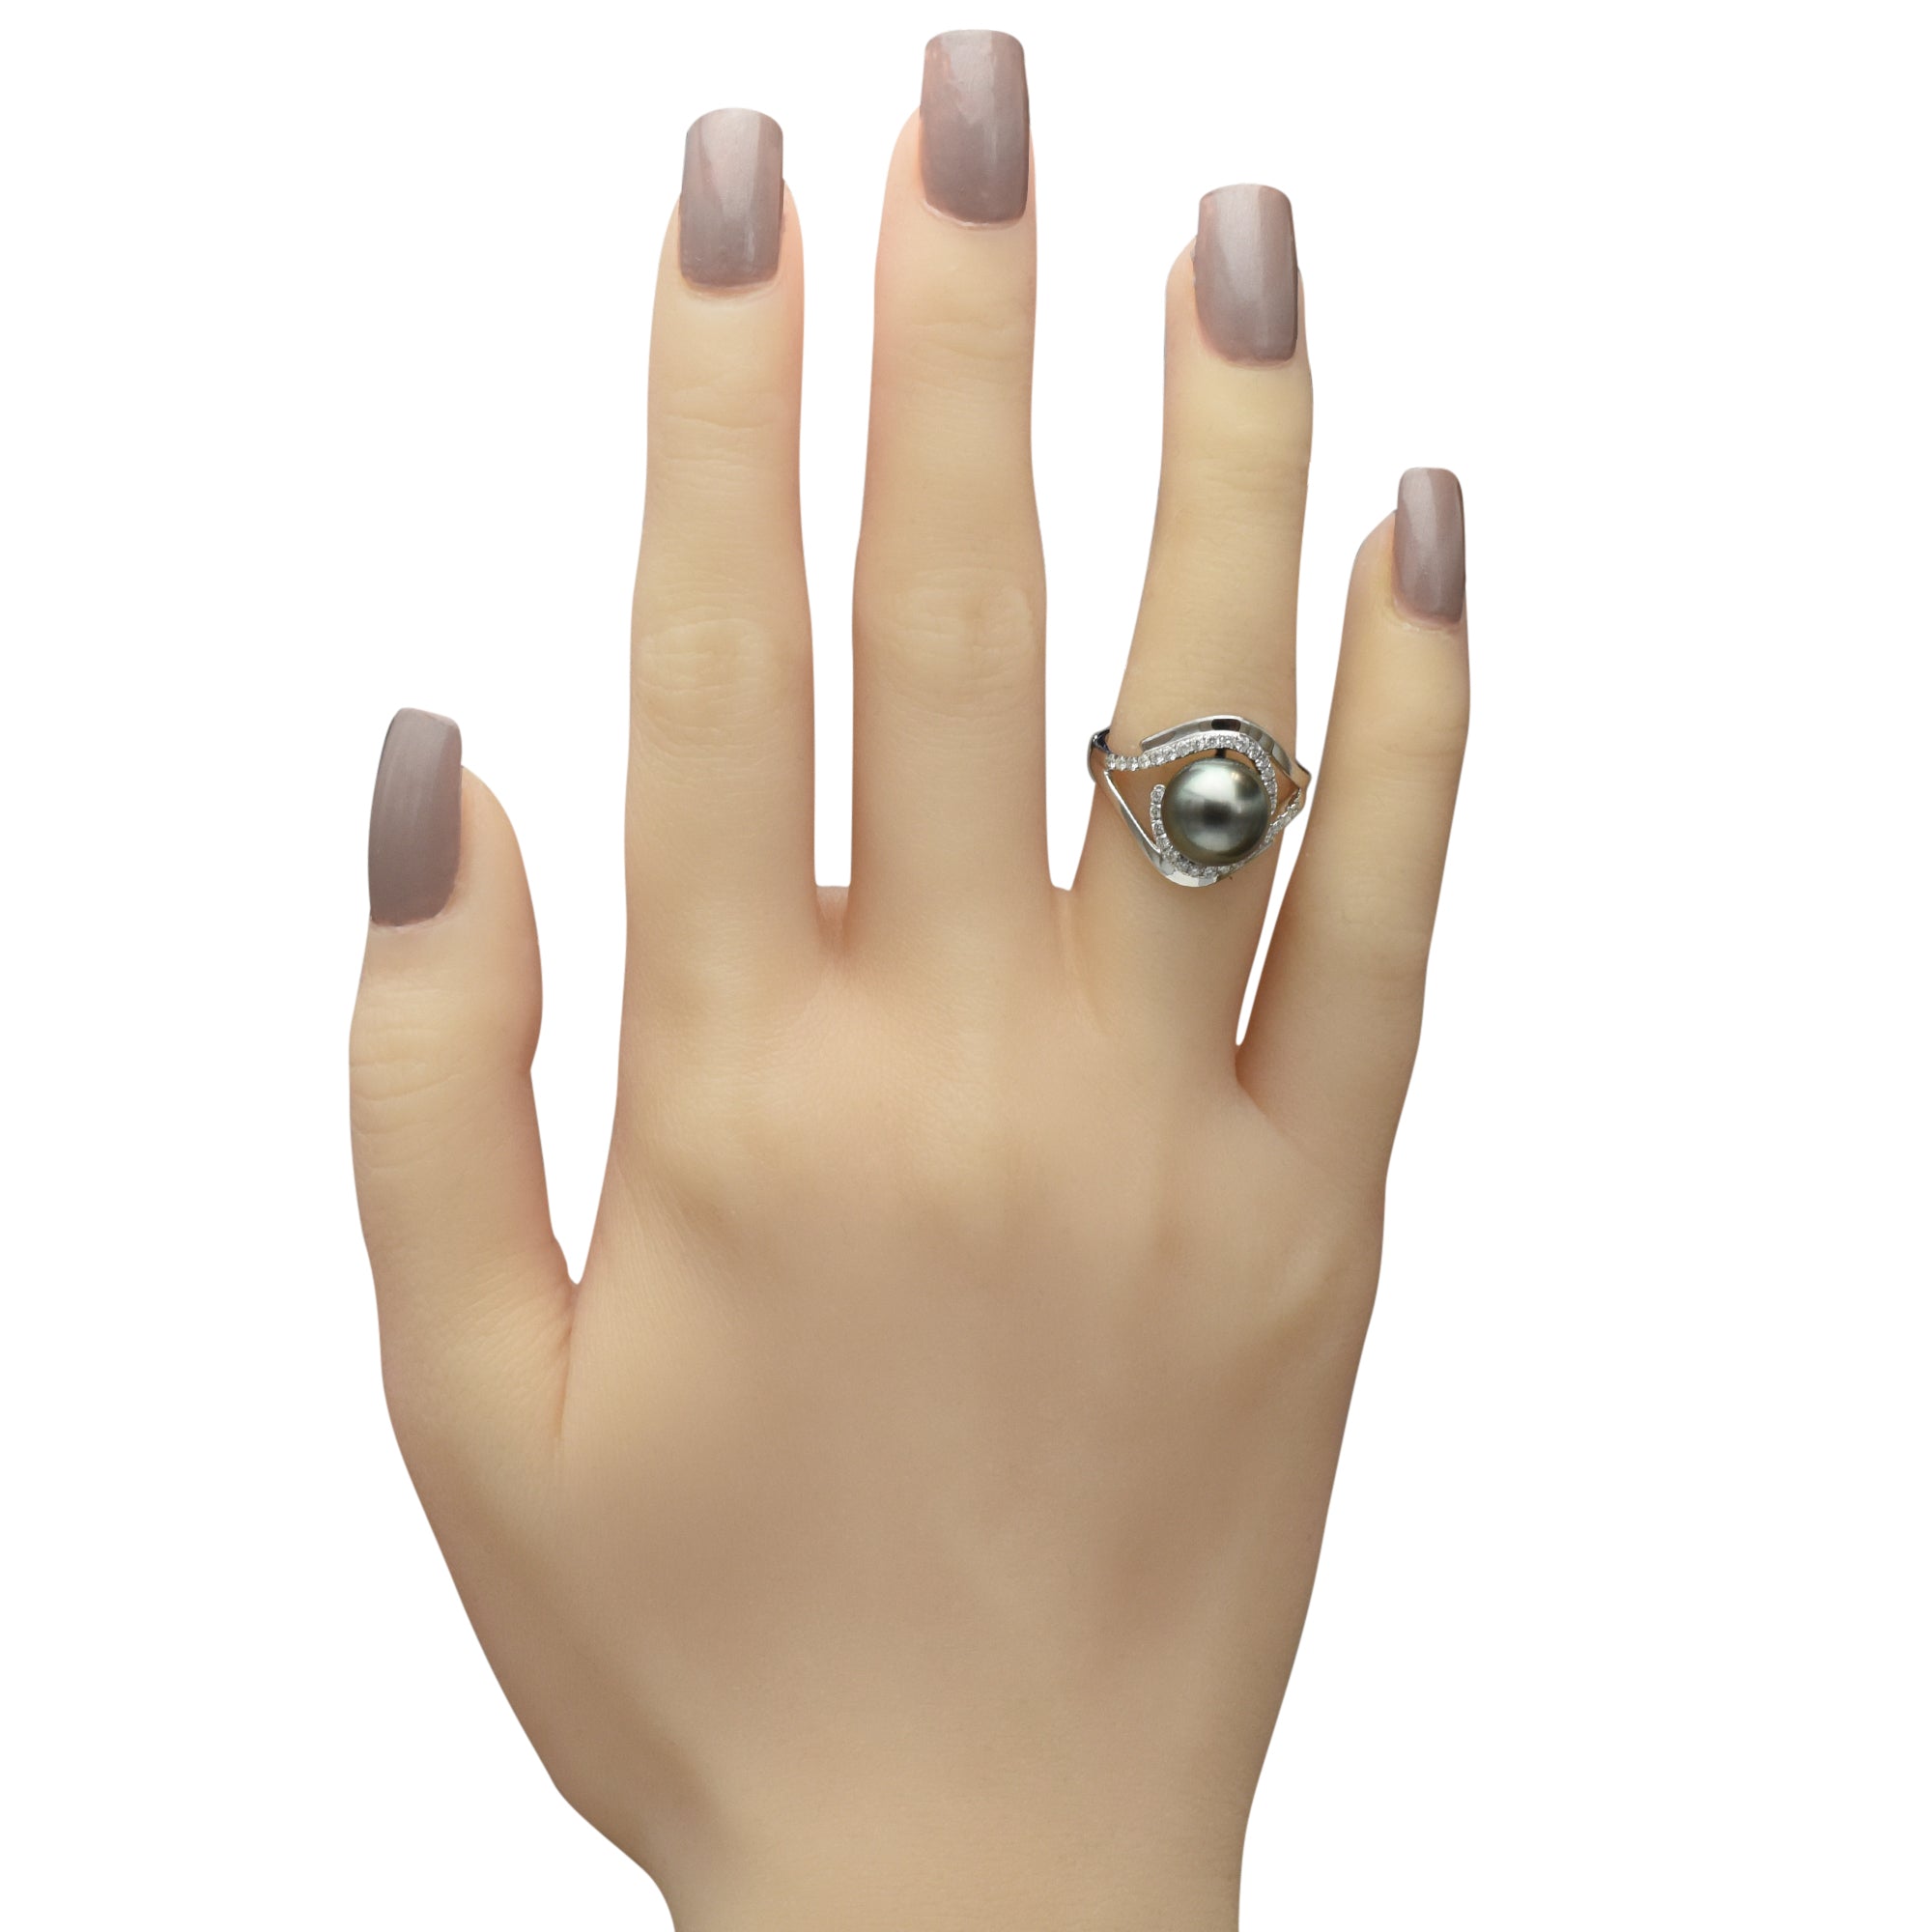 Black Tahitian Pearl Ring in 14kt White Gold with Diamonds (1/3ct tw) (10-11mm pearl)